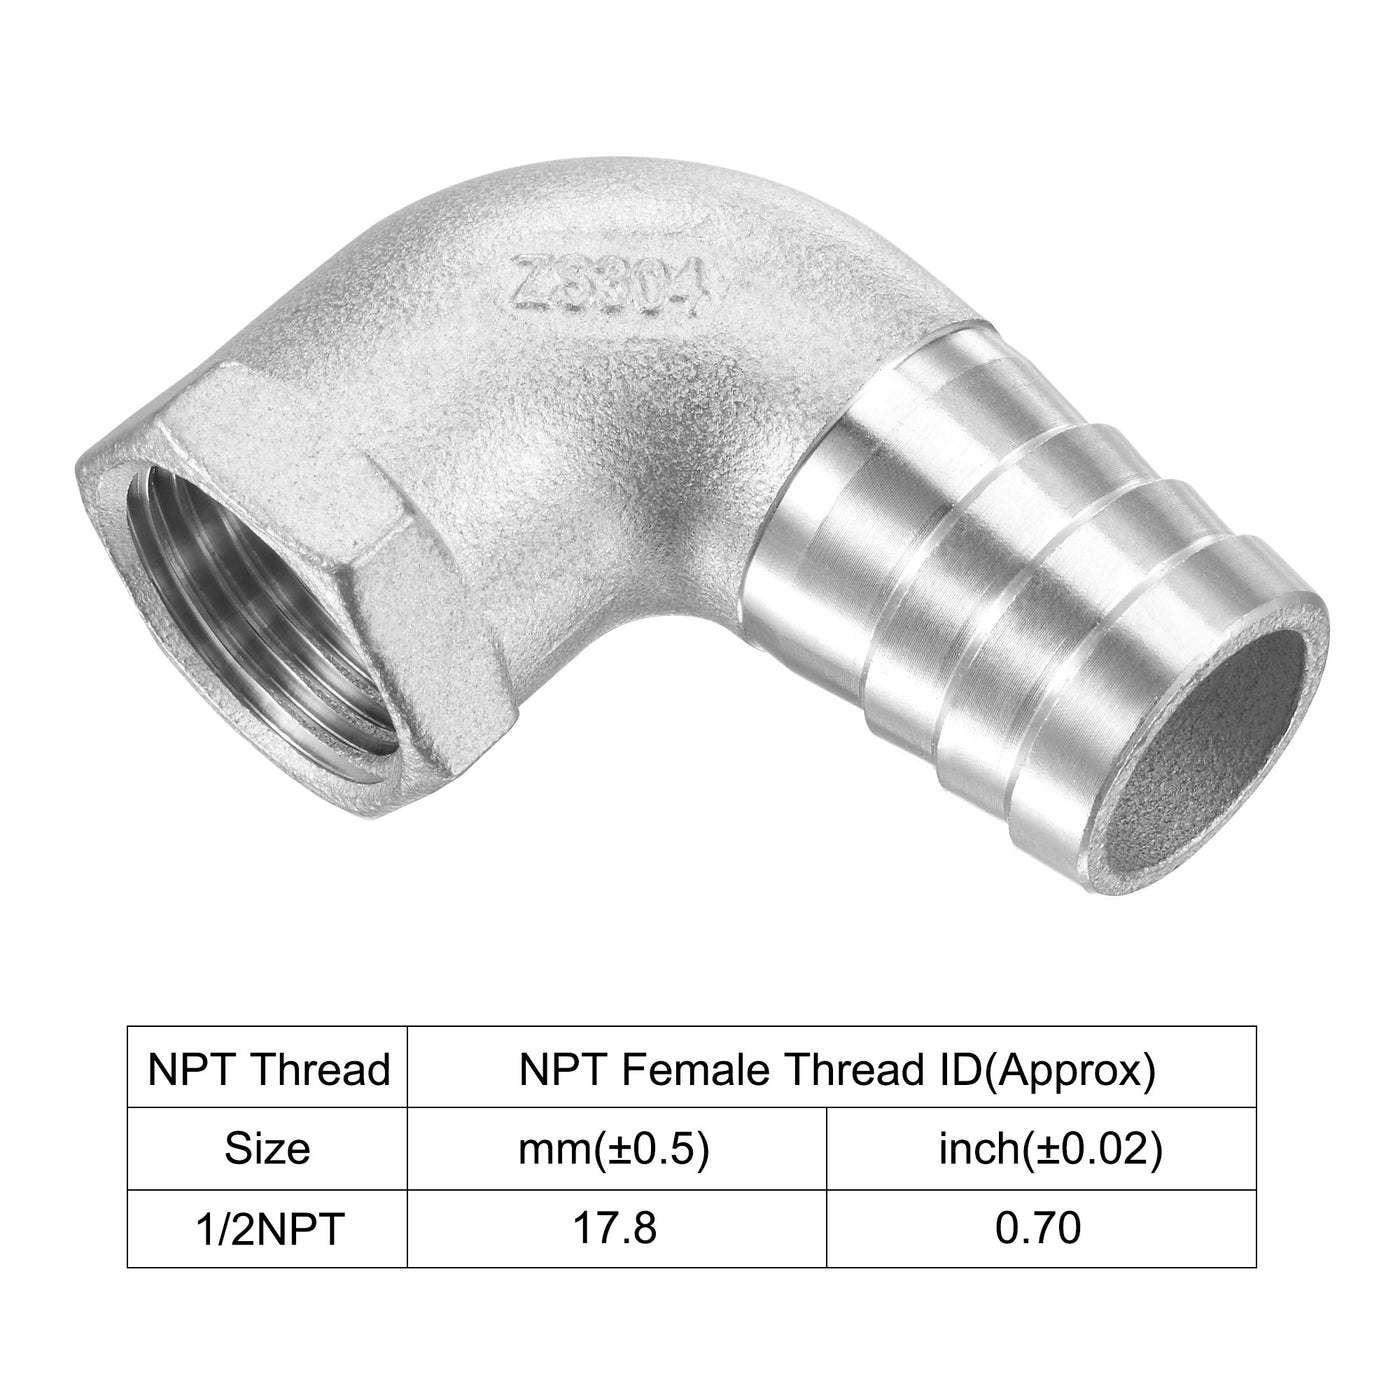 uxcell Uxcell 304 Stainless Steel Hose Barb Fittings Elbow Barbed NPT Female Pipe Connector Adapter for Water Fuel Air Home